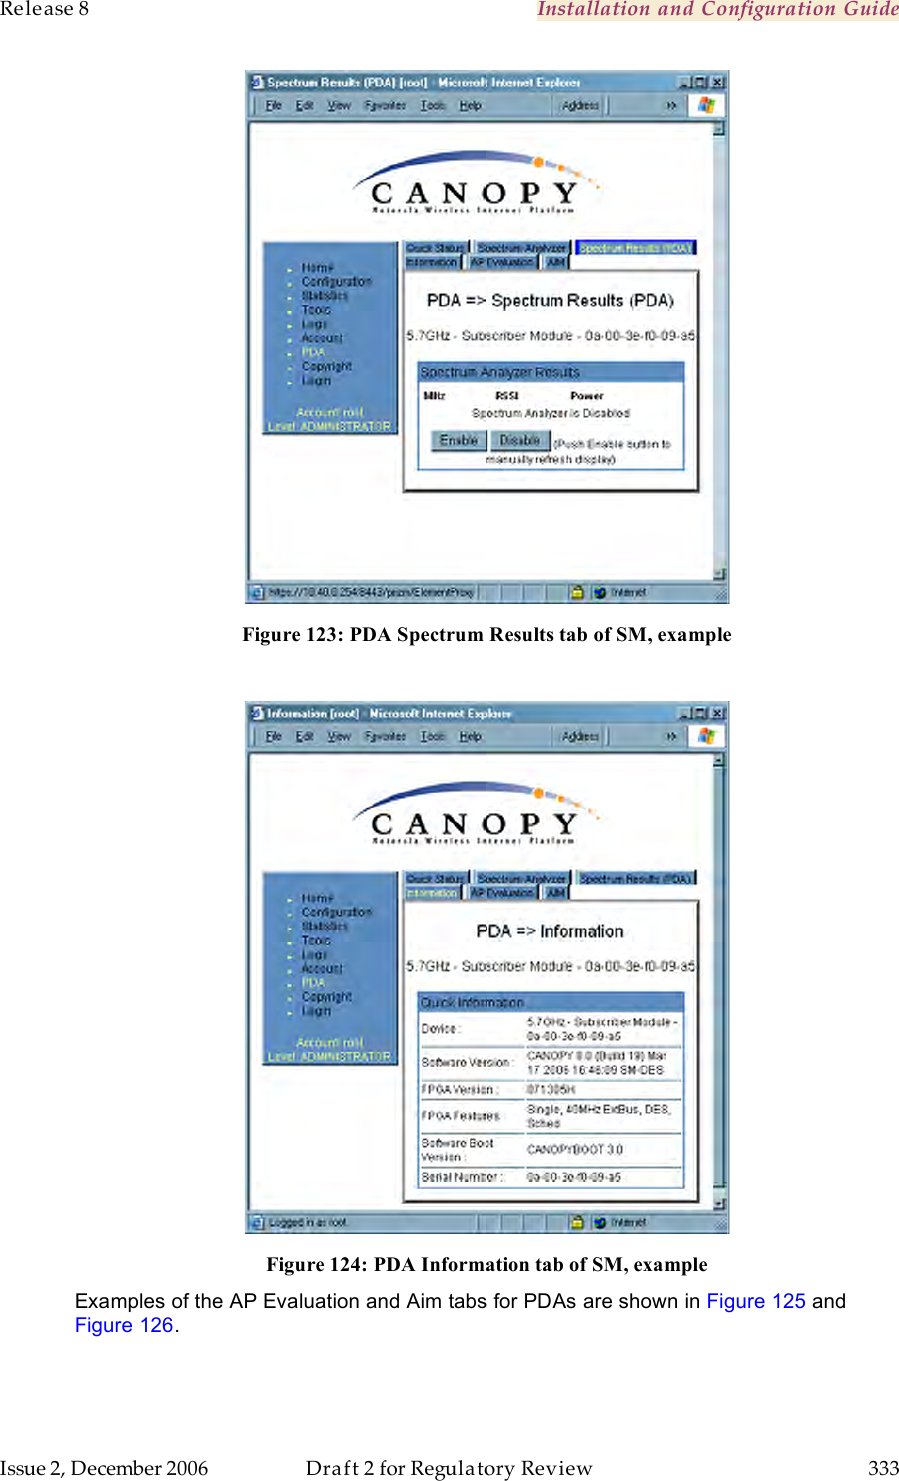 Release 8    Installation and Configuration Guide   Issue 2, December 2006  Draft 2 for Regulatory Review  333      Figure 123: PDA Spectrum Results tab of SM, example   Figure 124: PDA Information tab of SM, example Examples of the AP Evaluation and Aim tabs for PDAs are shown in Figure 125 and Figure 126. 